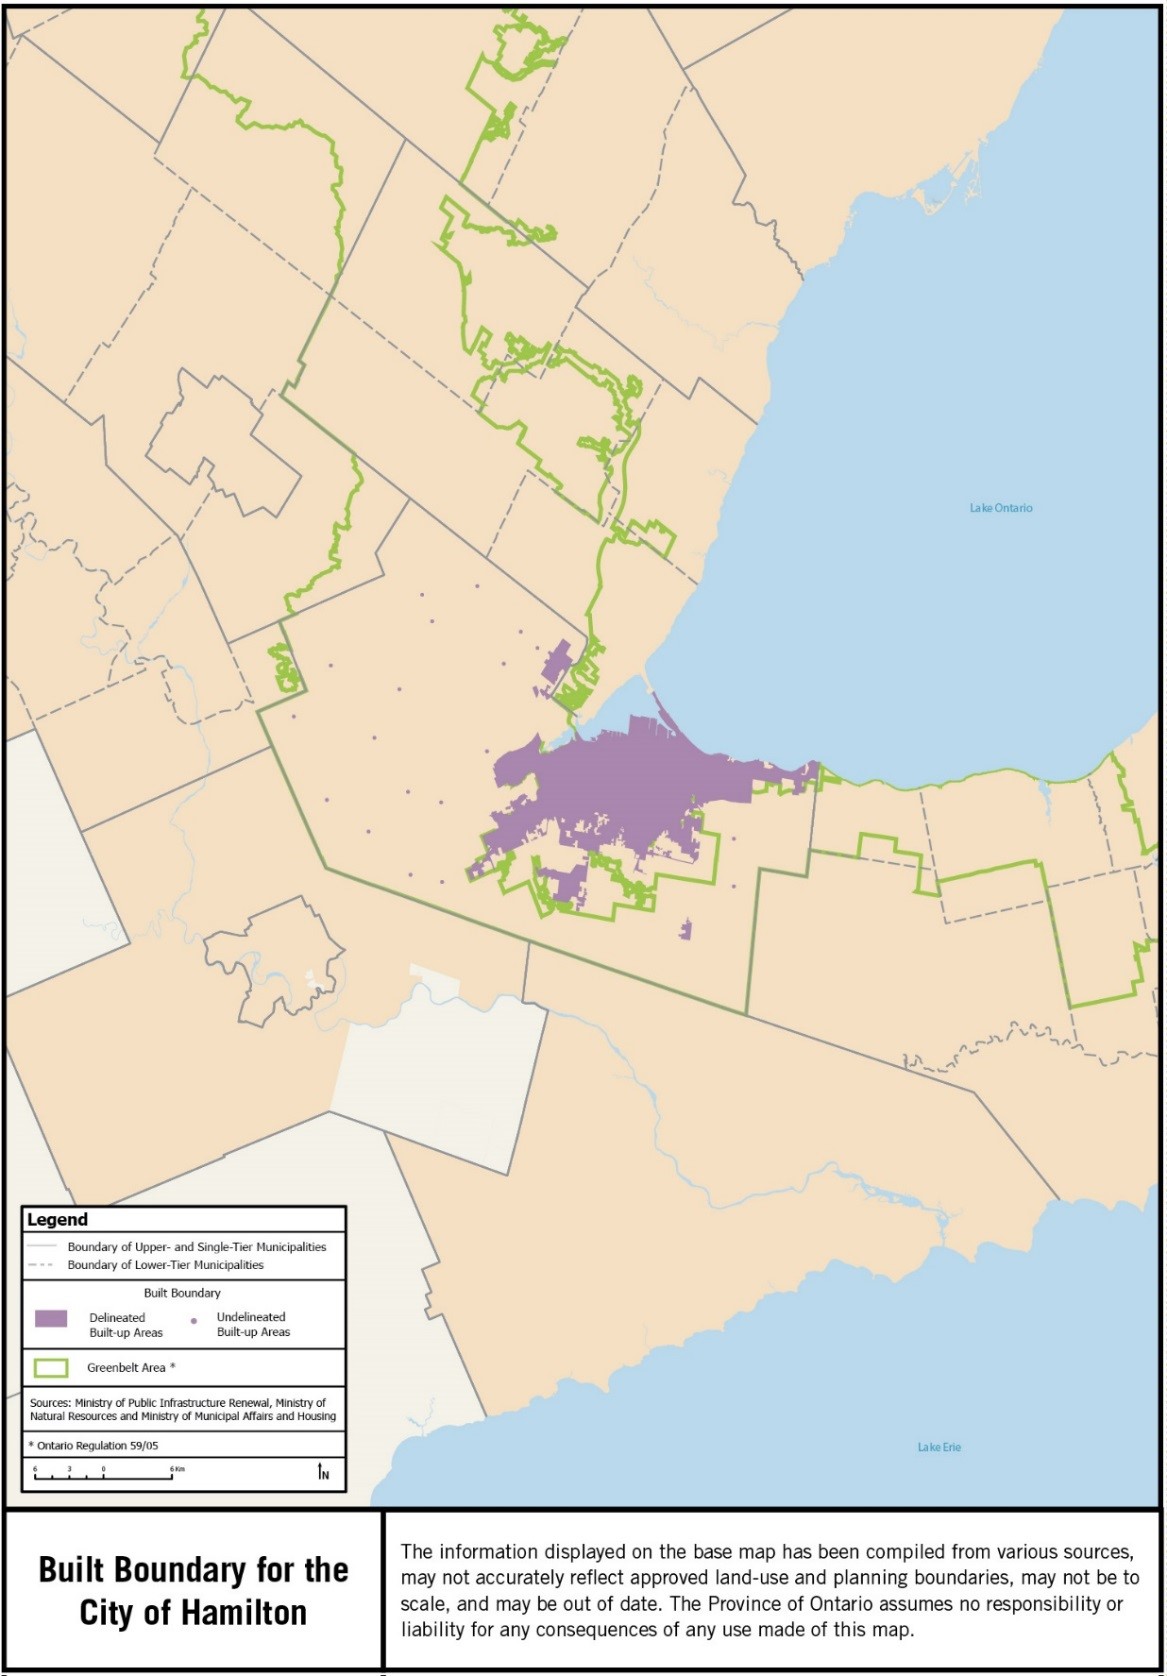 Map showing the built boundary for the City of Hamilton.